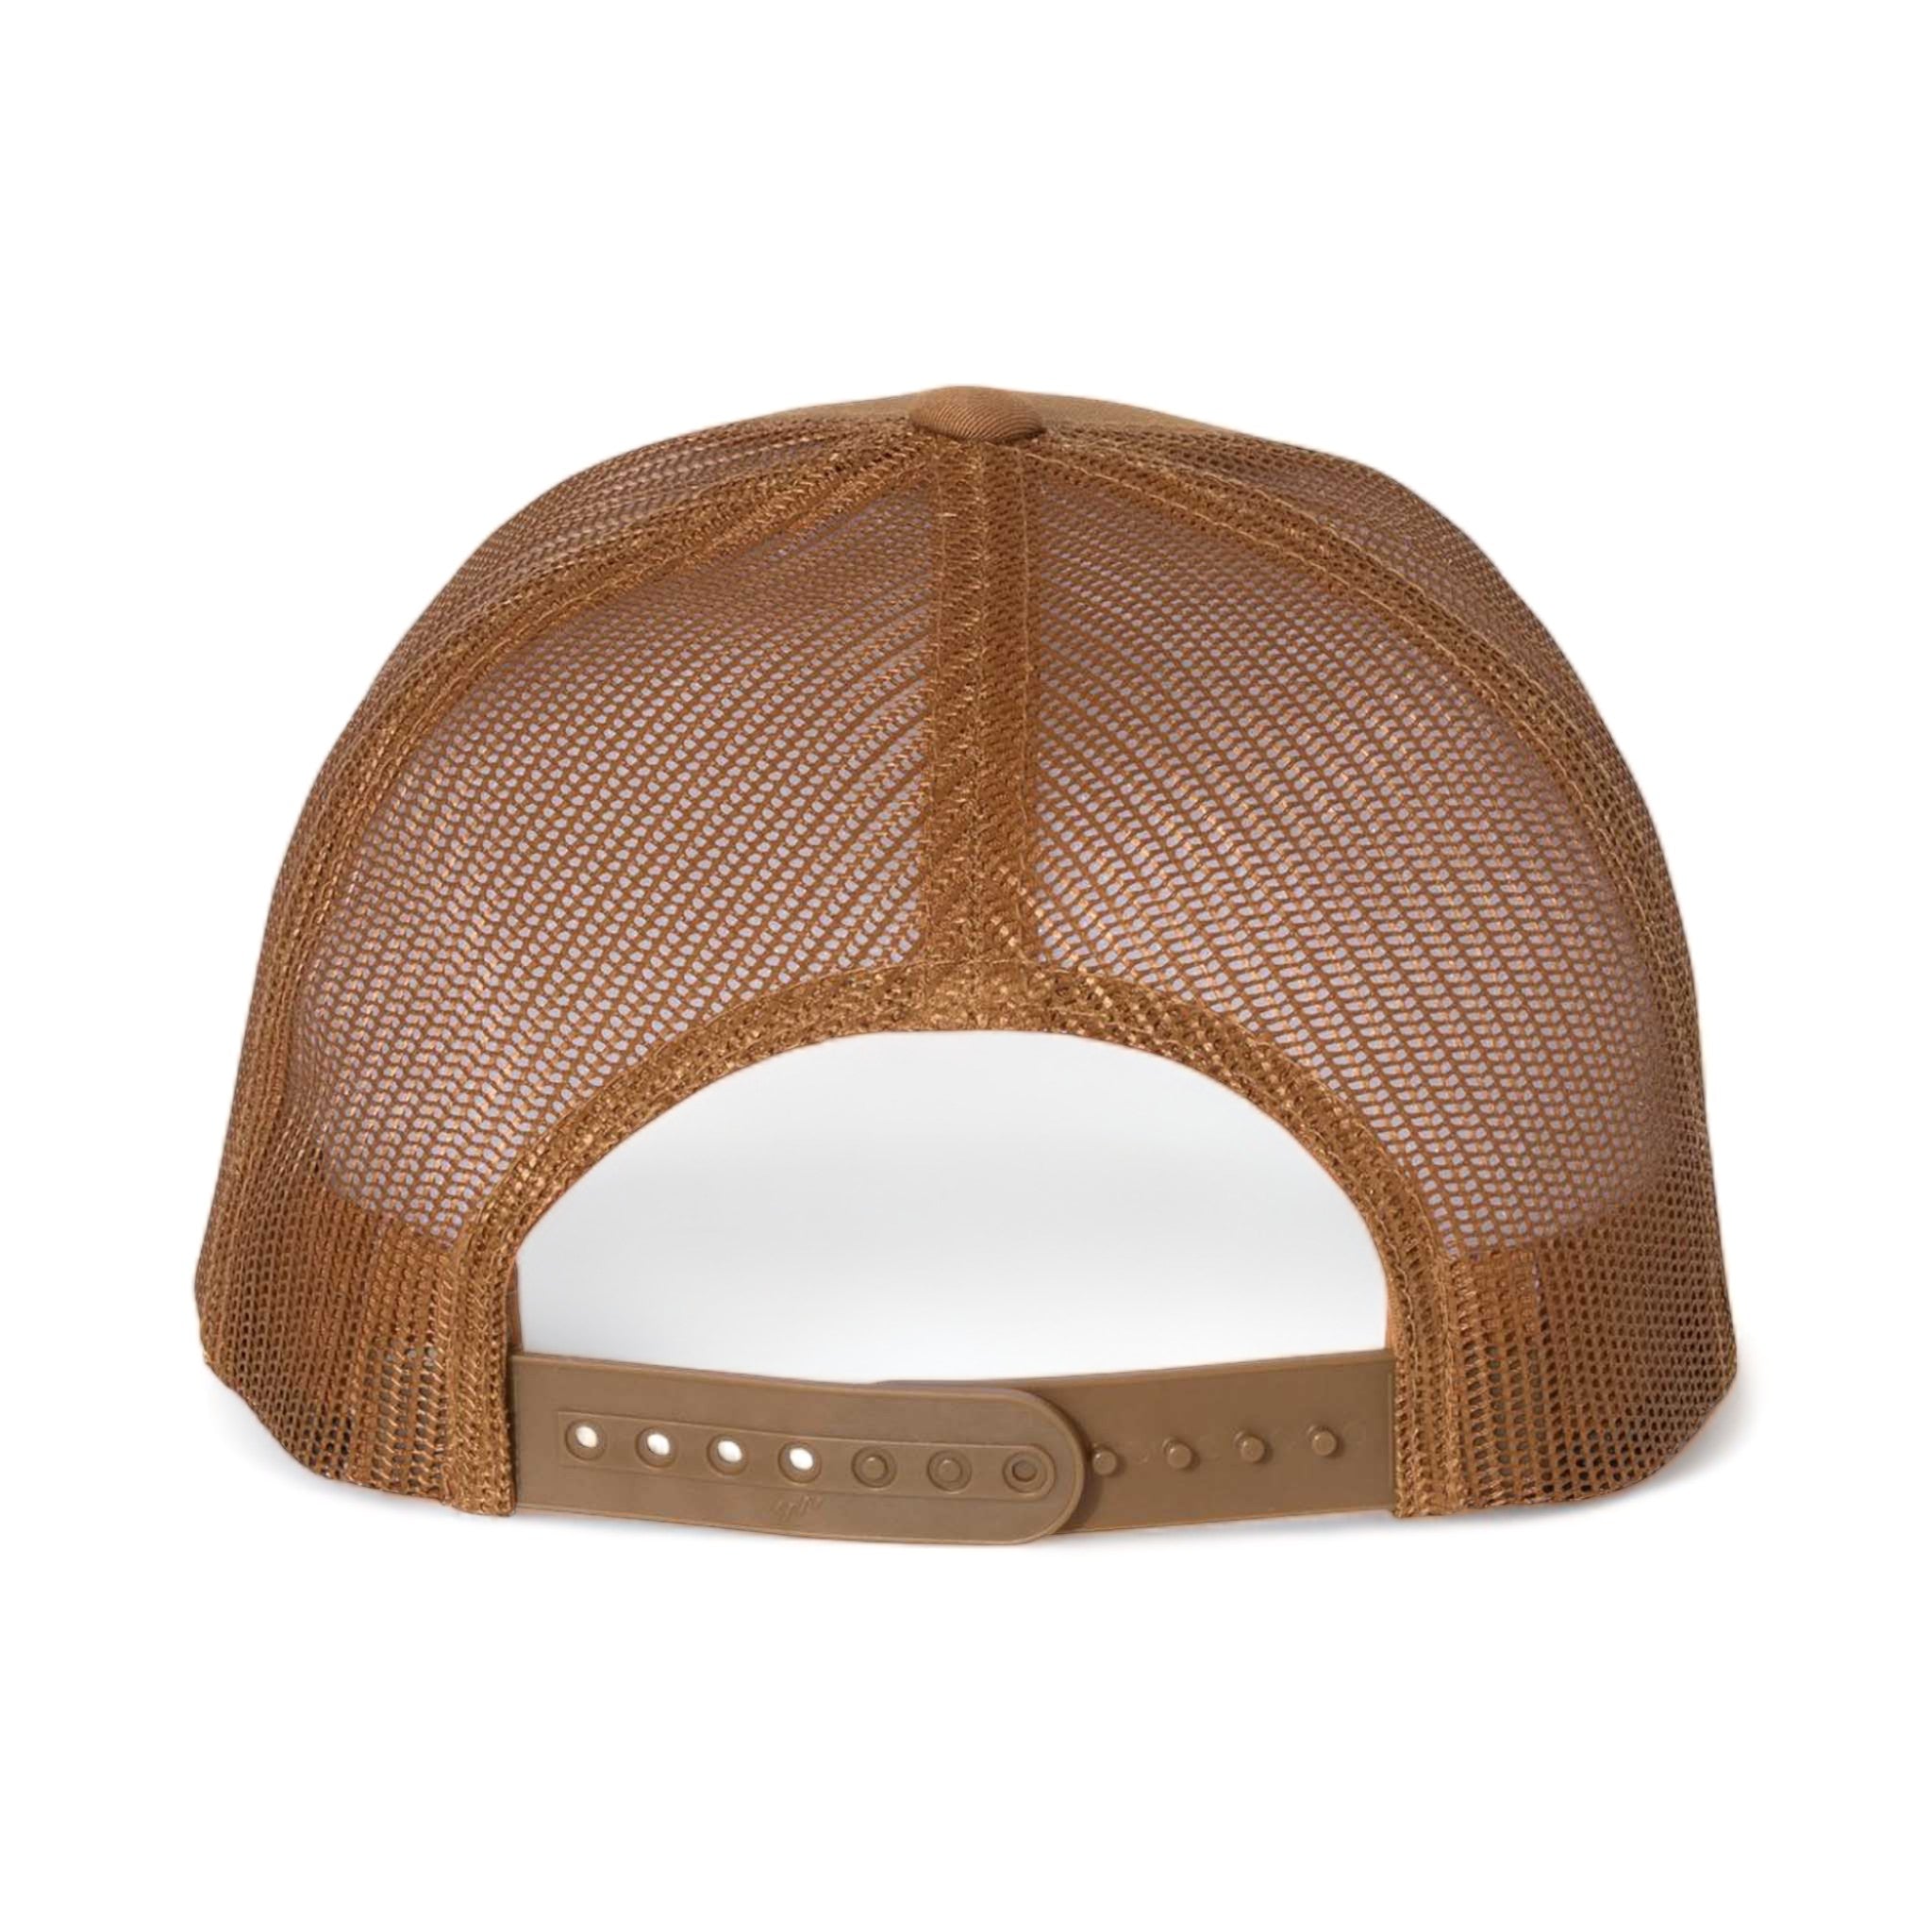 Back view of YP Classics 6606 custom hat in caramel